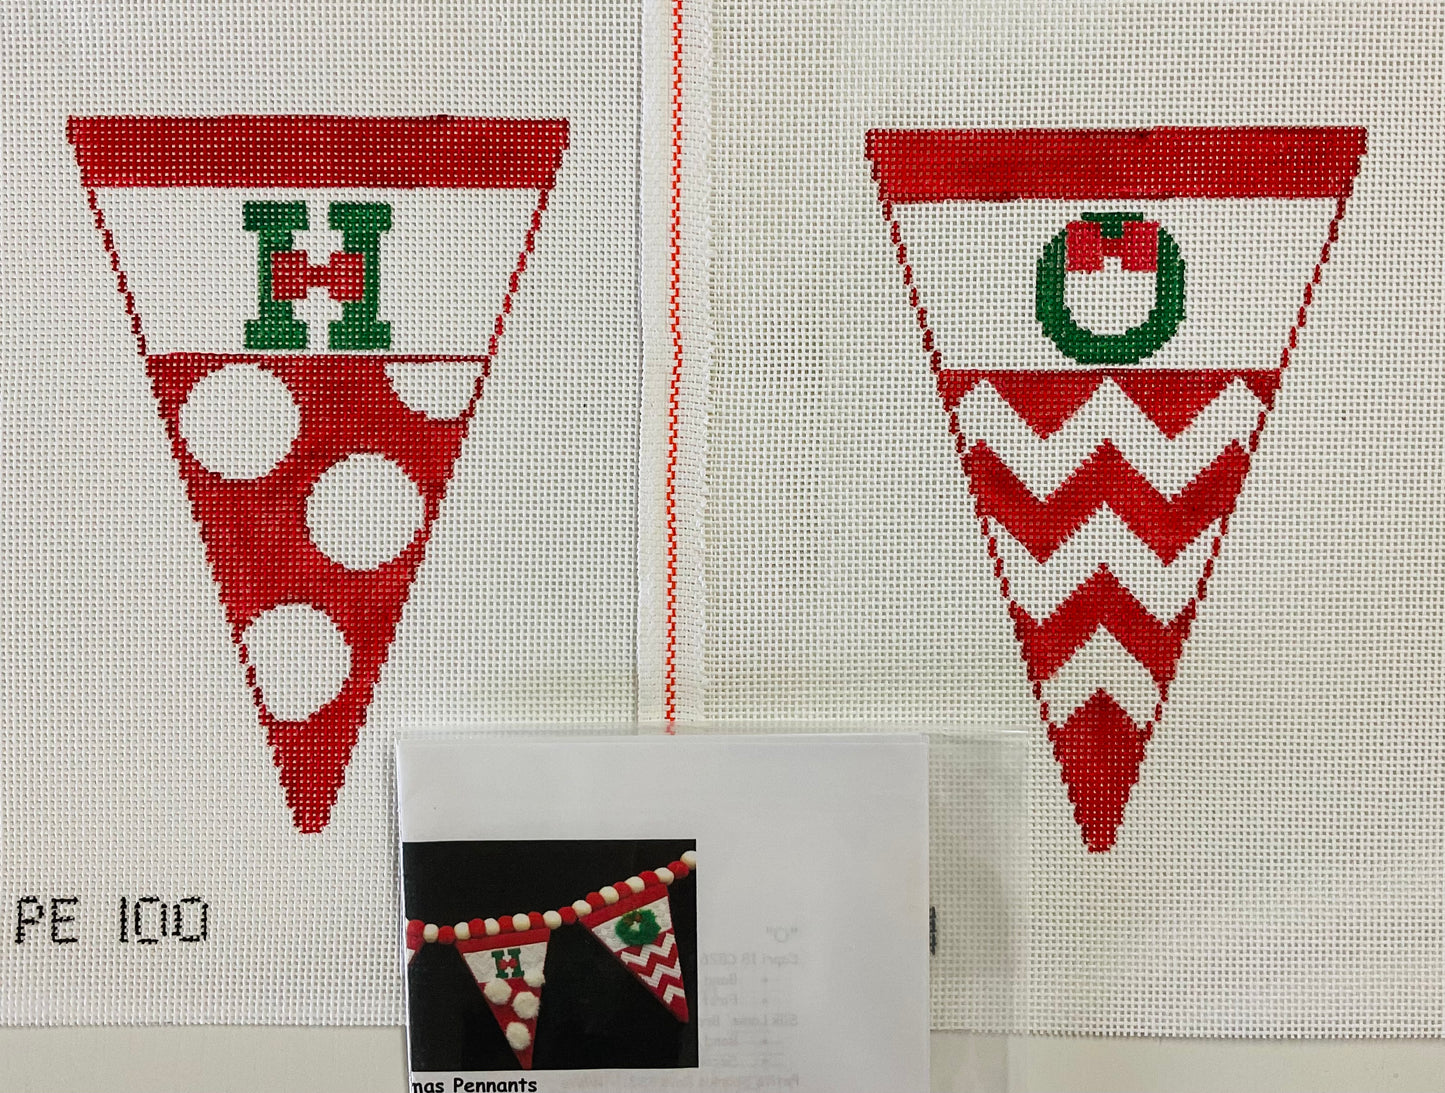 Ho Ho Pennants (2 canvases) with Stitch Guide